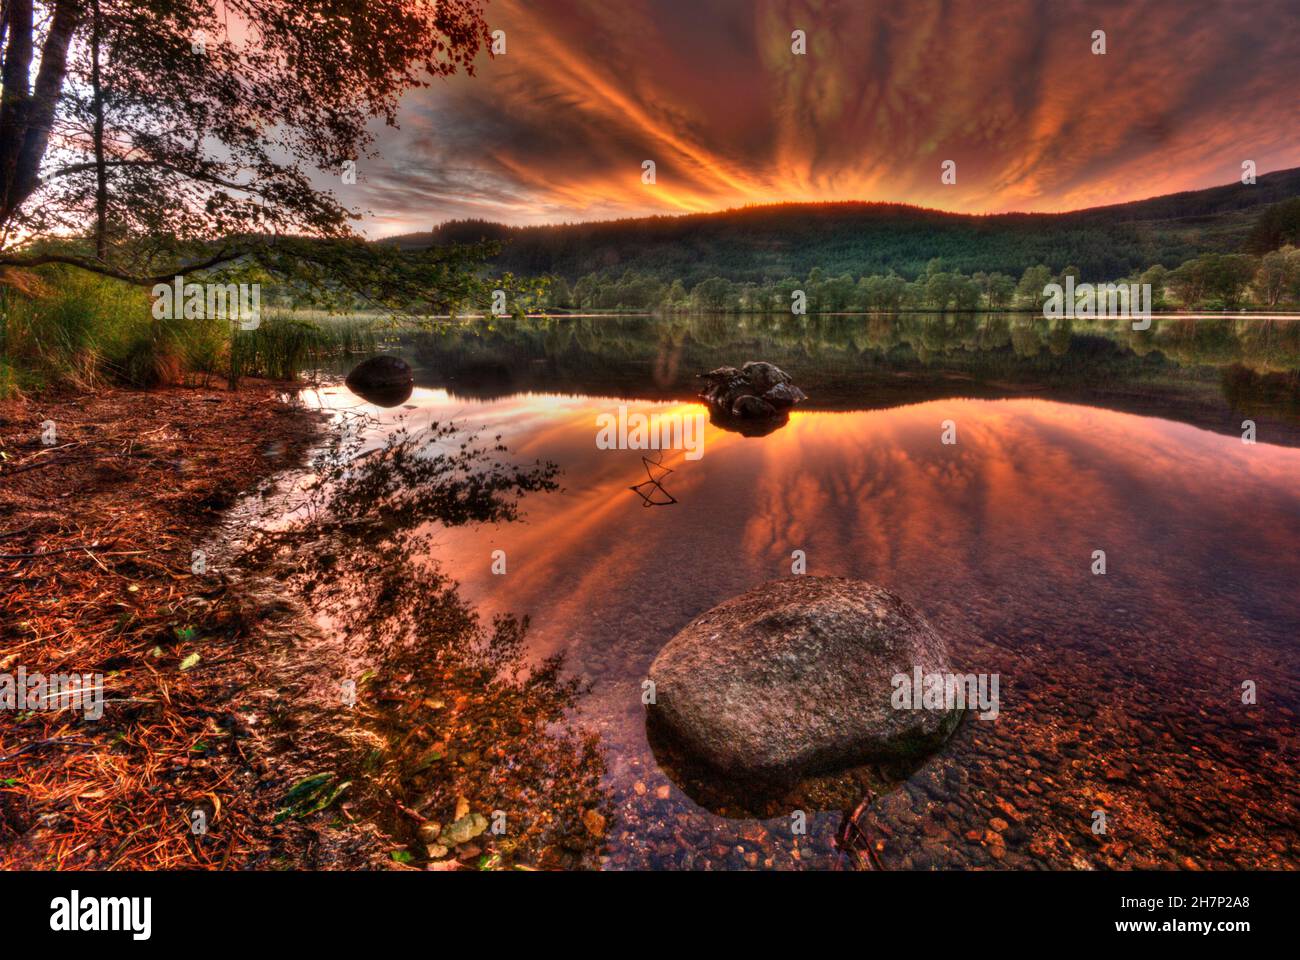 SUNSET AT LOCH TROOL IN DUMFRIES AND GALLOWAY SCOTLAND Stock Photo